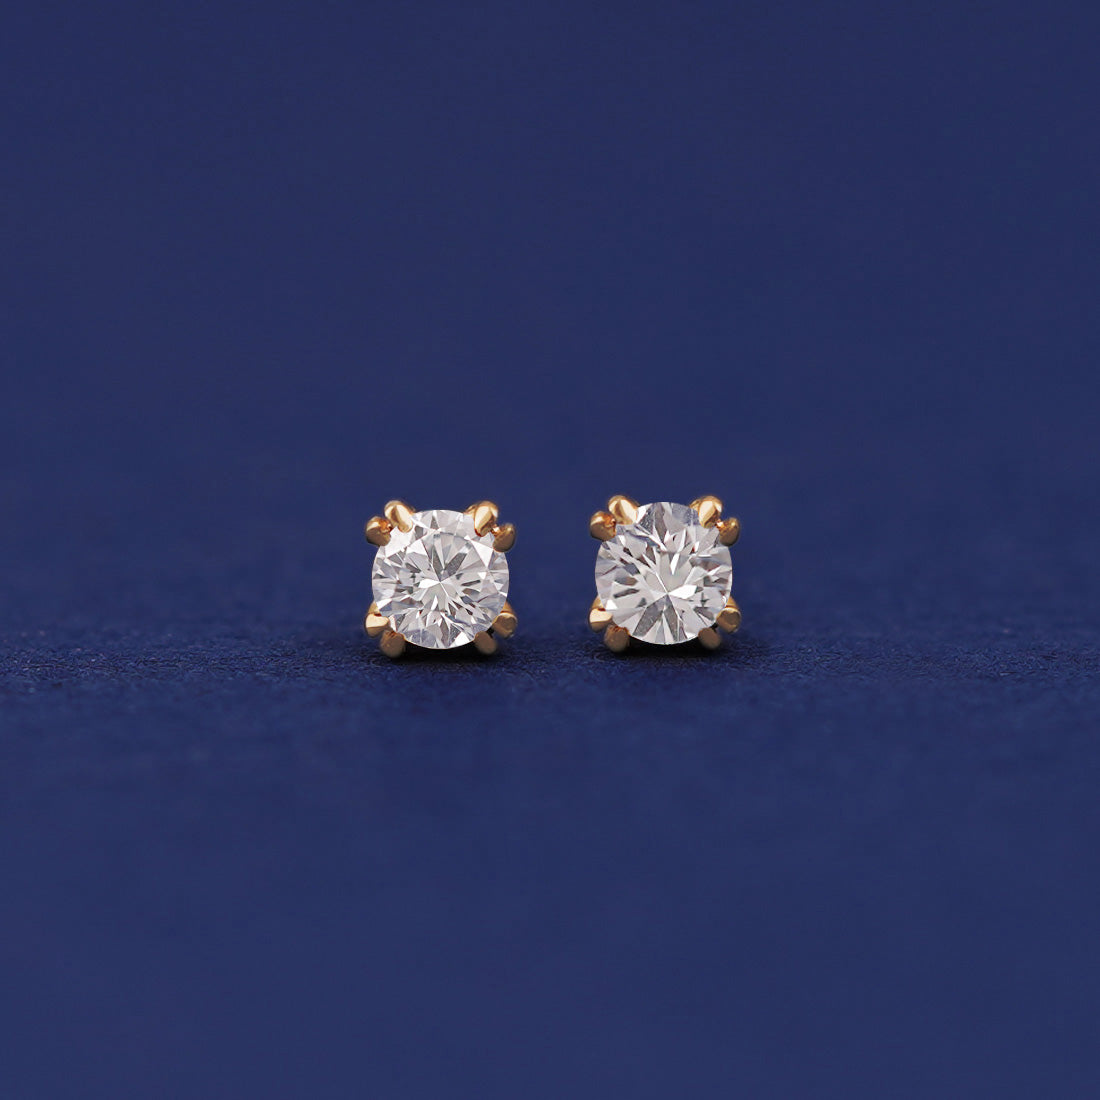 A pair of 14 karat gold studs earrings with 3 millimeter round Moissanite gemstones